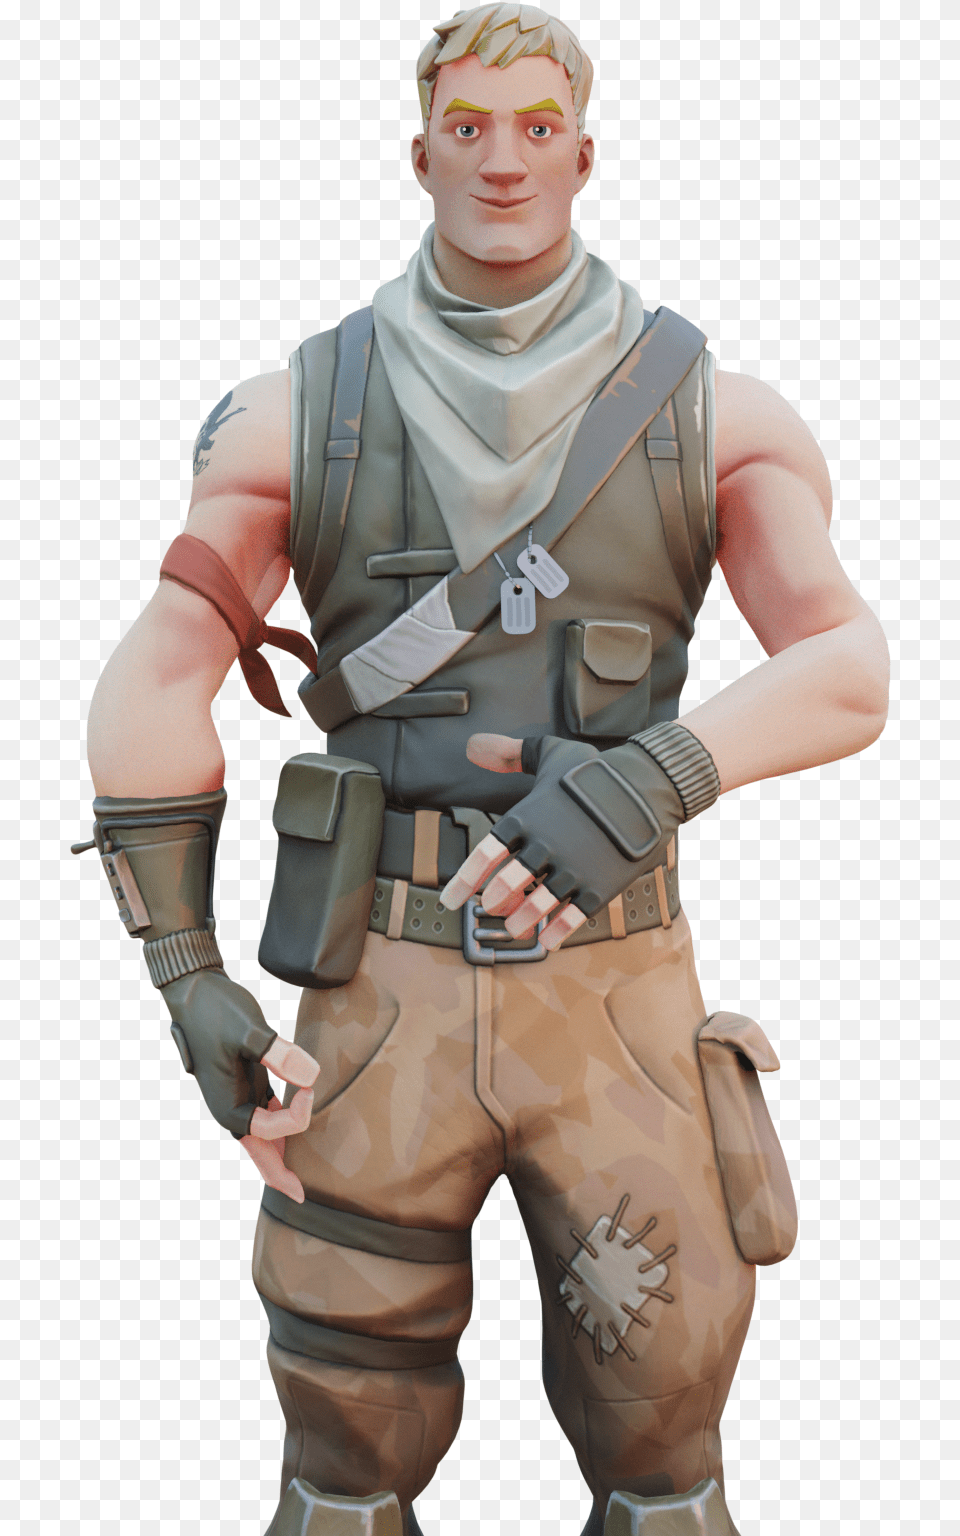 New To Rendering Would Like Feedback Fortnitebr Soldier, Clothing, Costume, Person, Adult Png